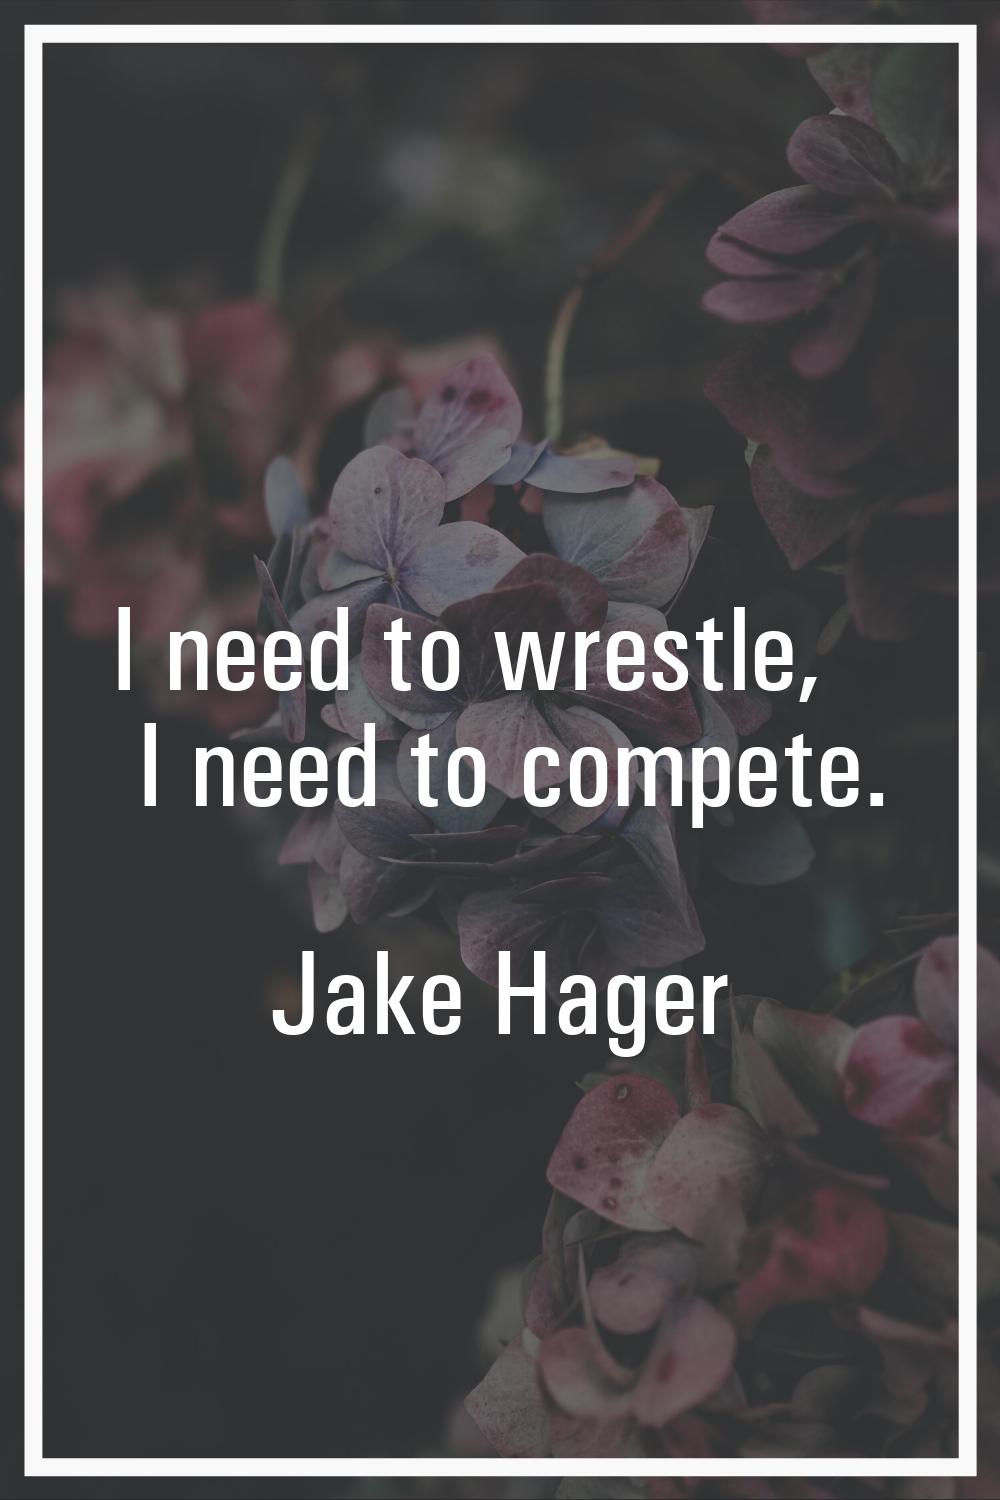 I need to wrestle, I need to compete.